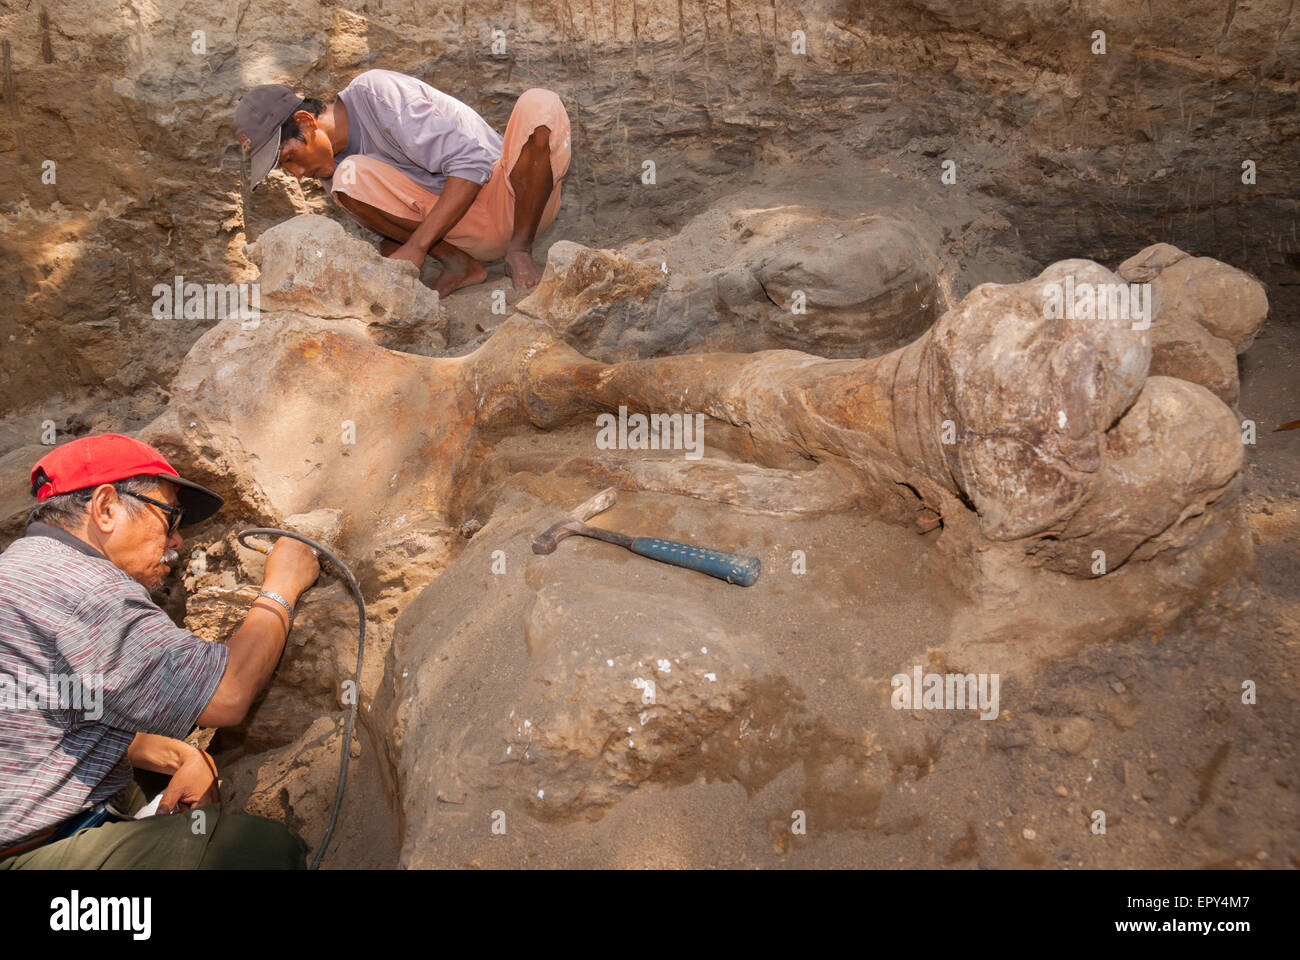 Fachroel Aziz, a research professor in vertebrate palaeontology (wearing red baseball cap), is working during an excavation in Blora, Indonesia. Stock Photo